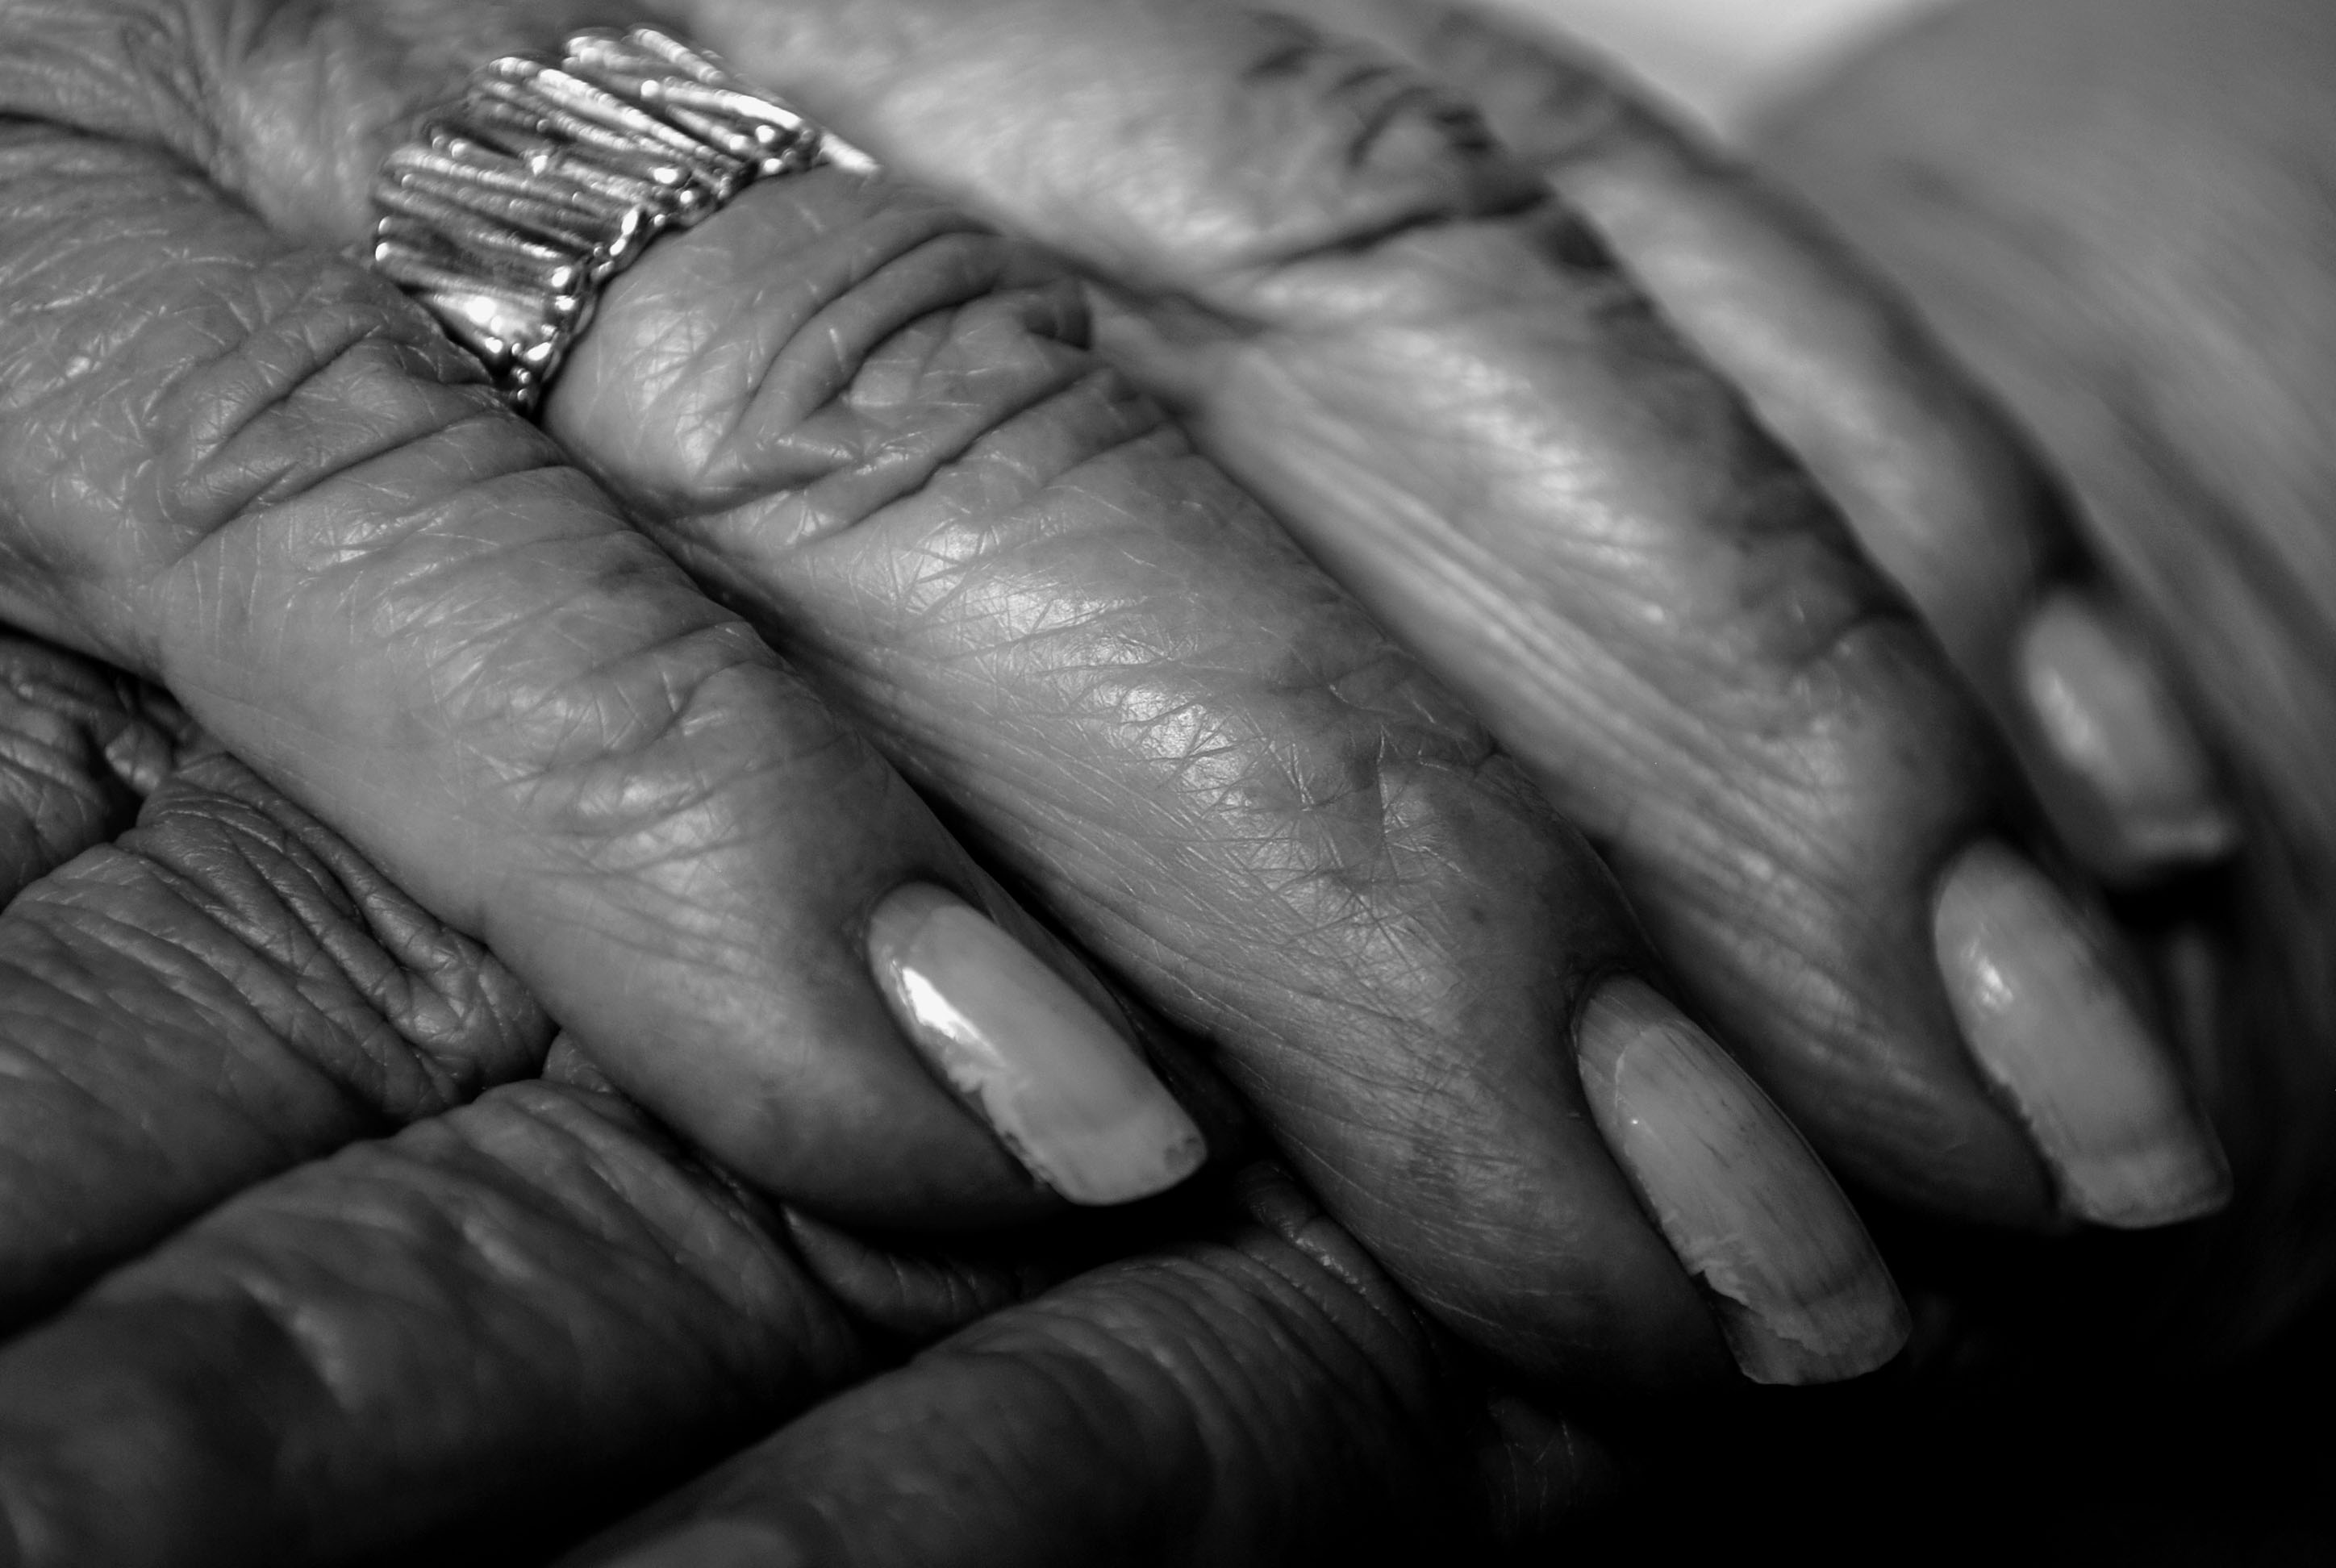 Aged Hands